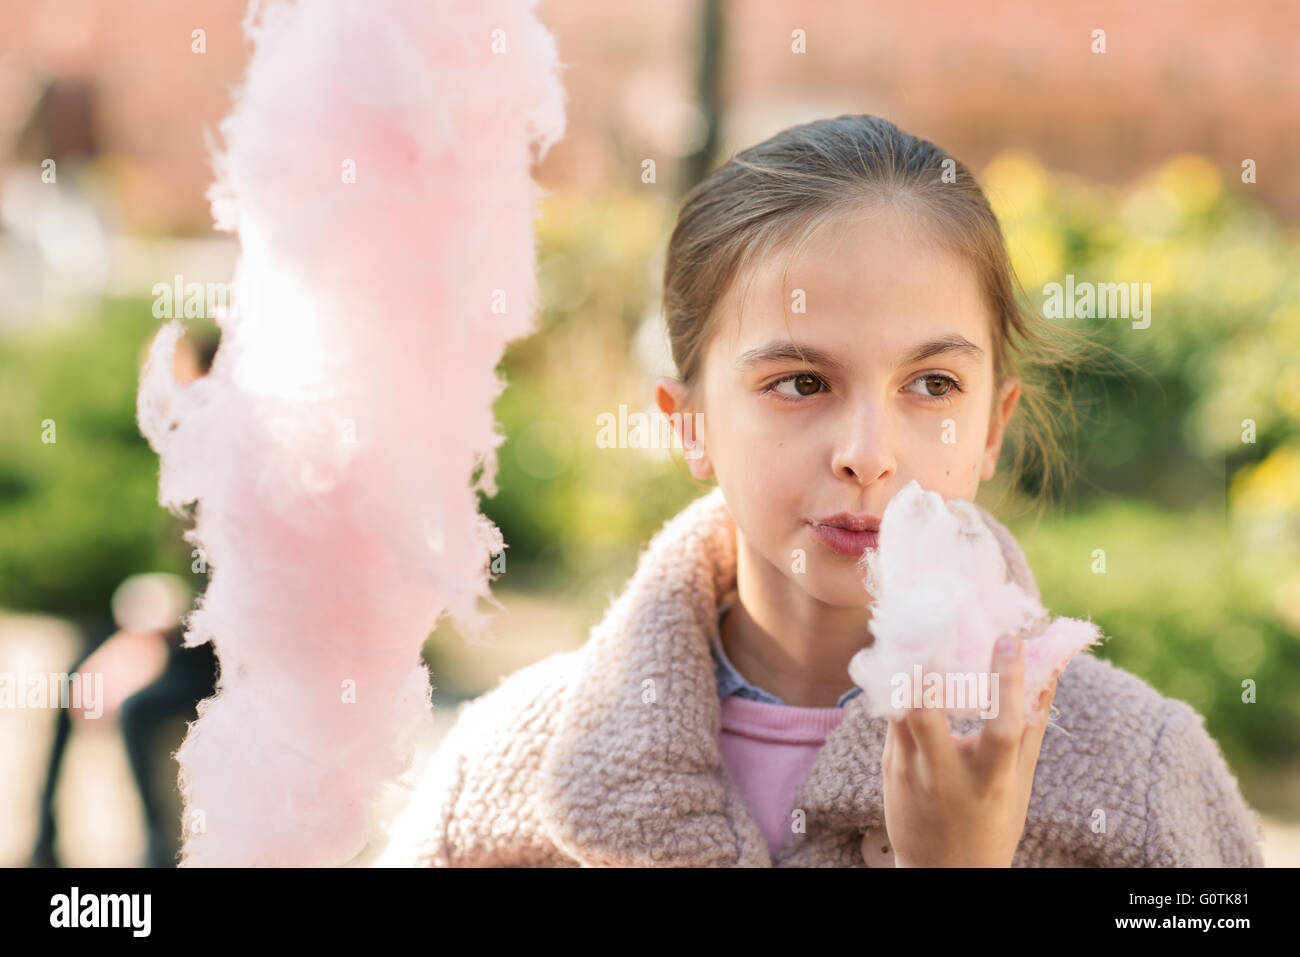 Front view of a girl eating cotton candy Stock Photo